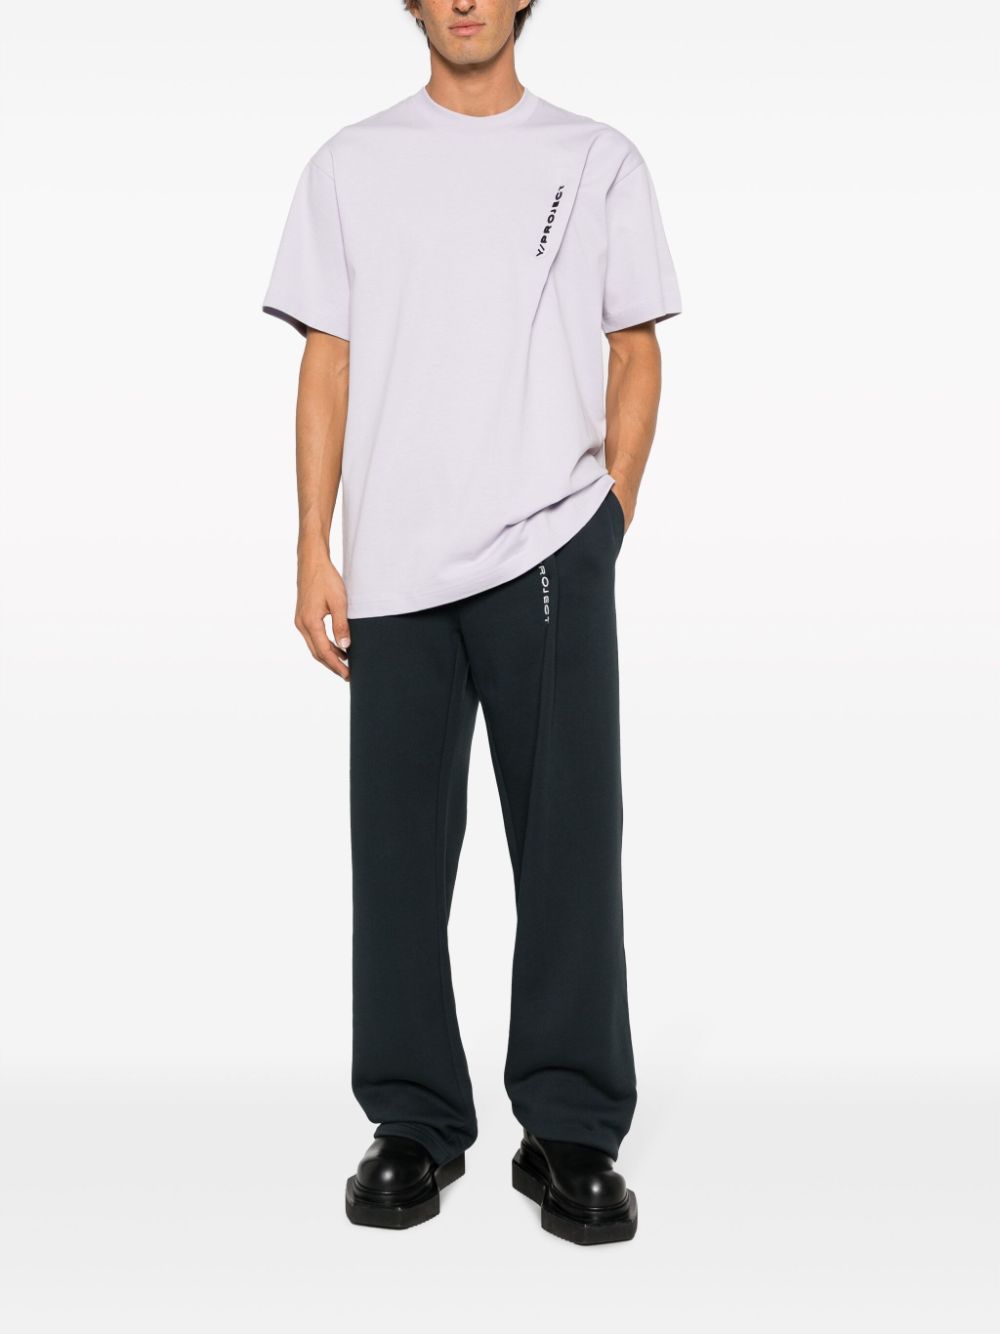 Undercover elastic-waist Panelled Track Pants - Farfetch